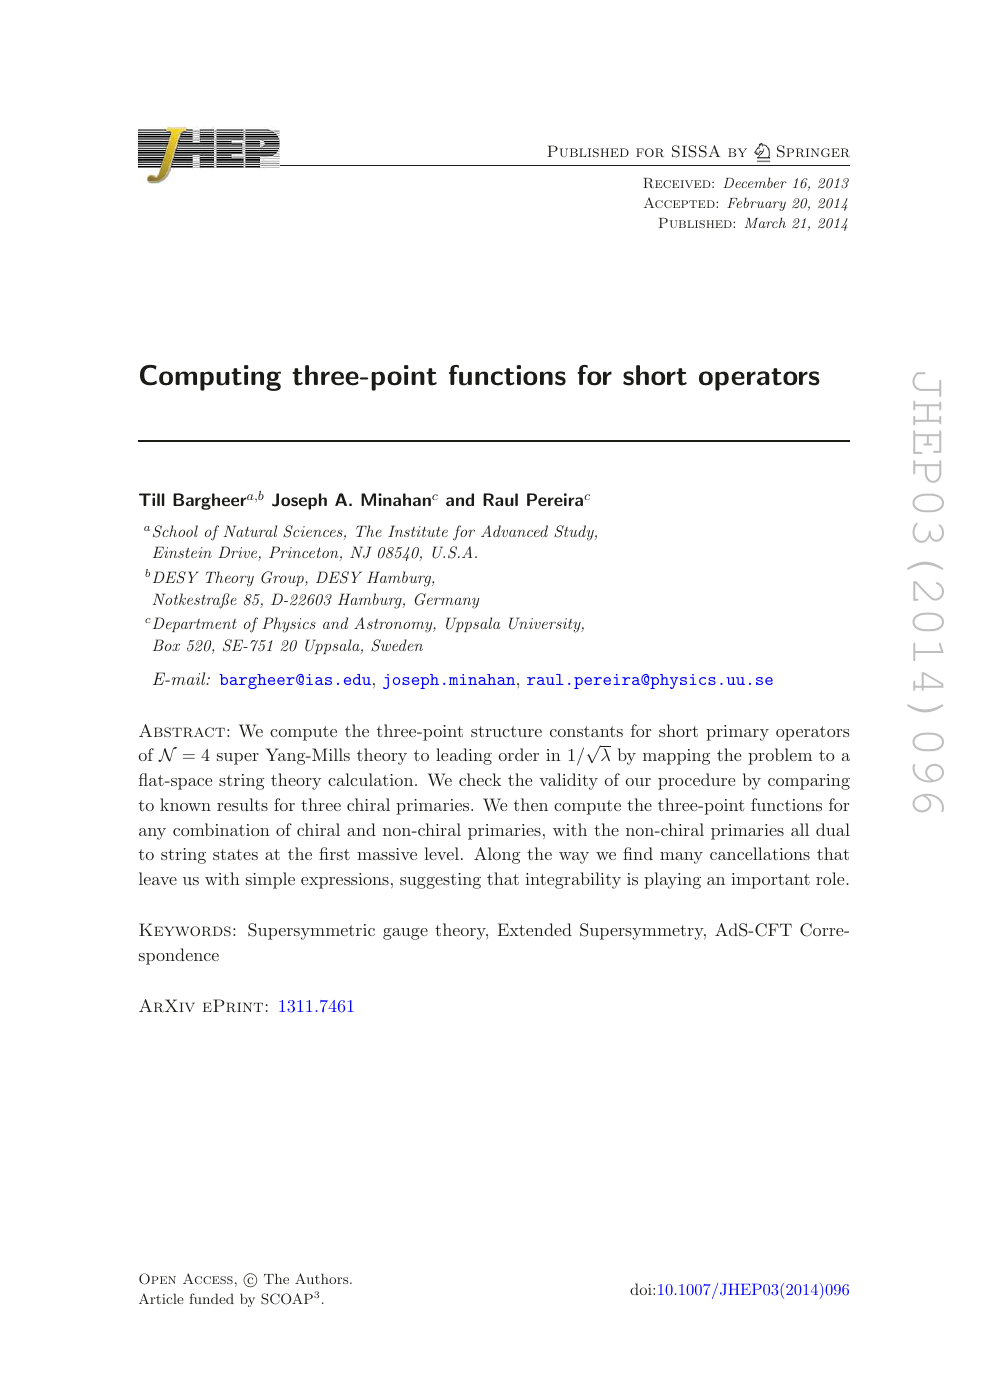 Computing Three Point Functions For Short Operators Topic Of Research Paper In Physical Sciences Download Scholarly Article Pdf And Read For Free On Cyberleninka Open Science Hub